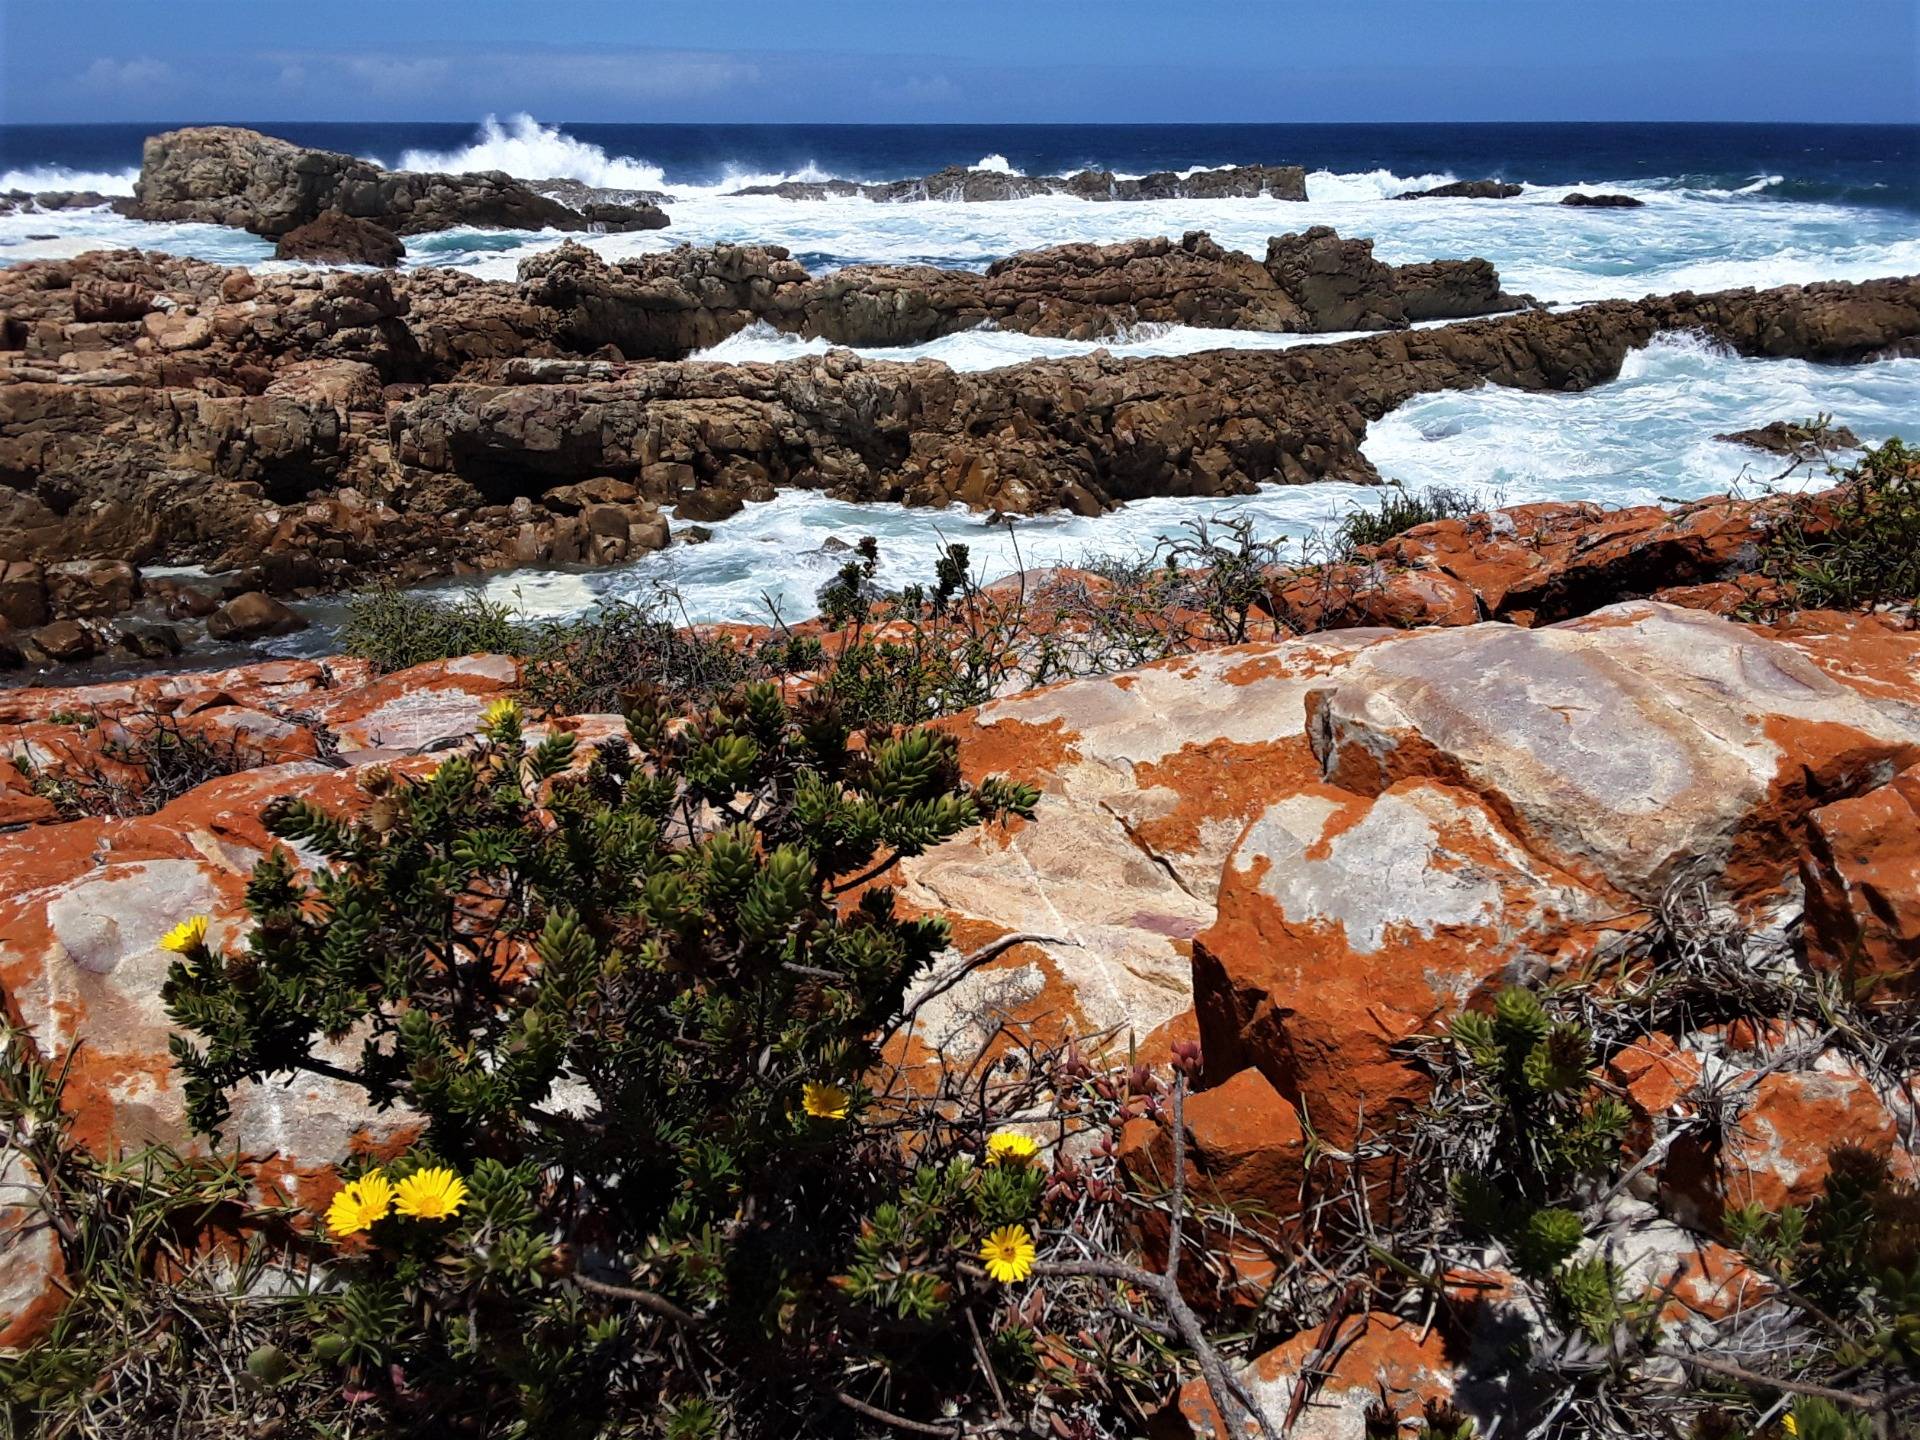 Floral rejuvenation after seasonal fires on the south coast of Africa